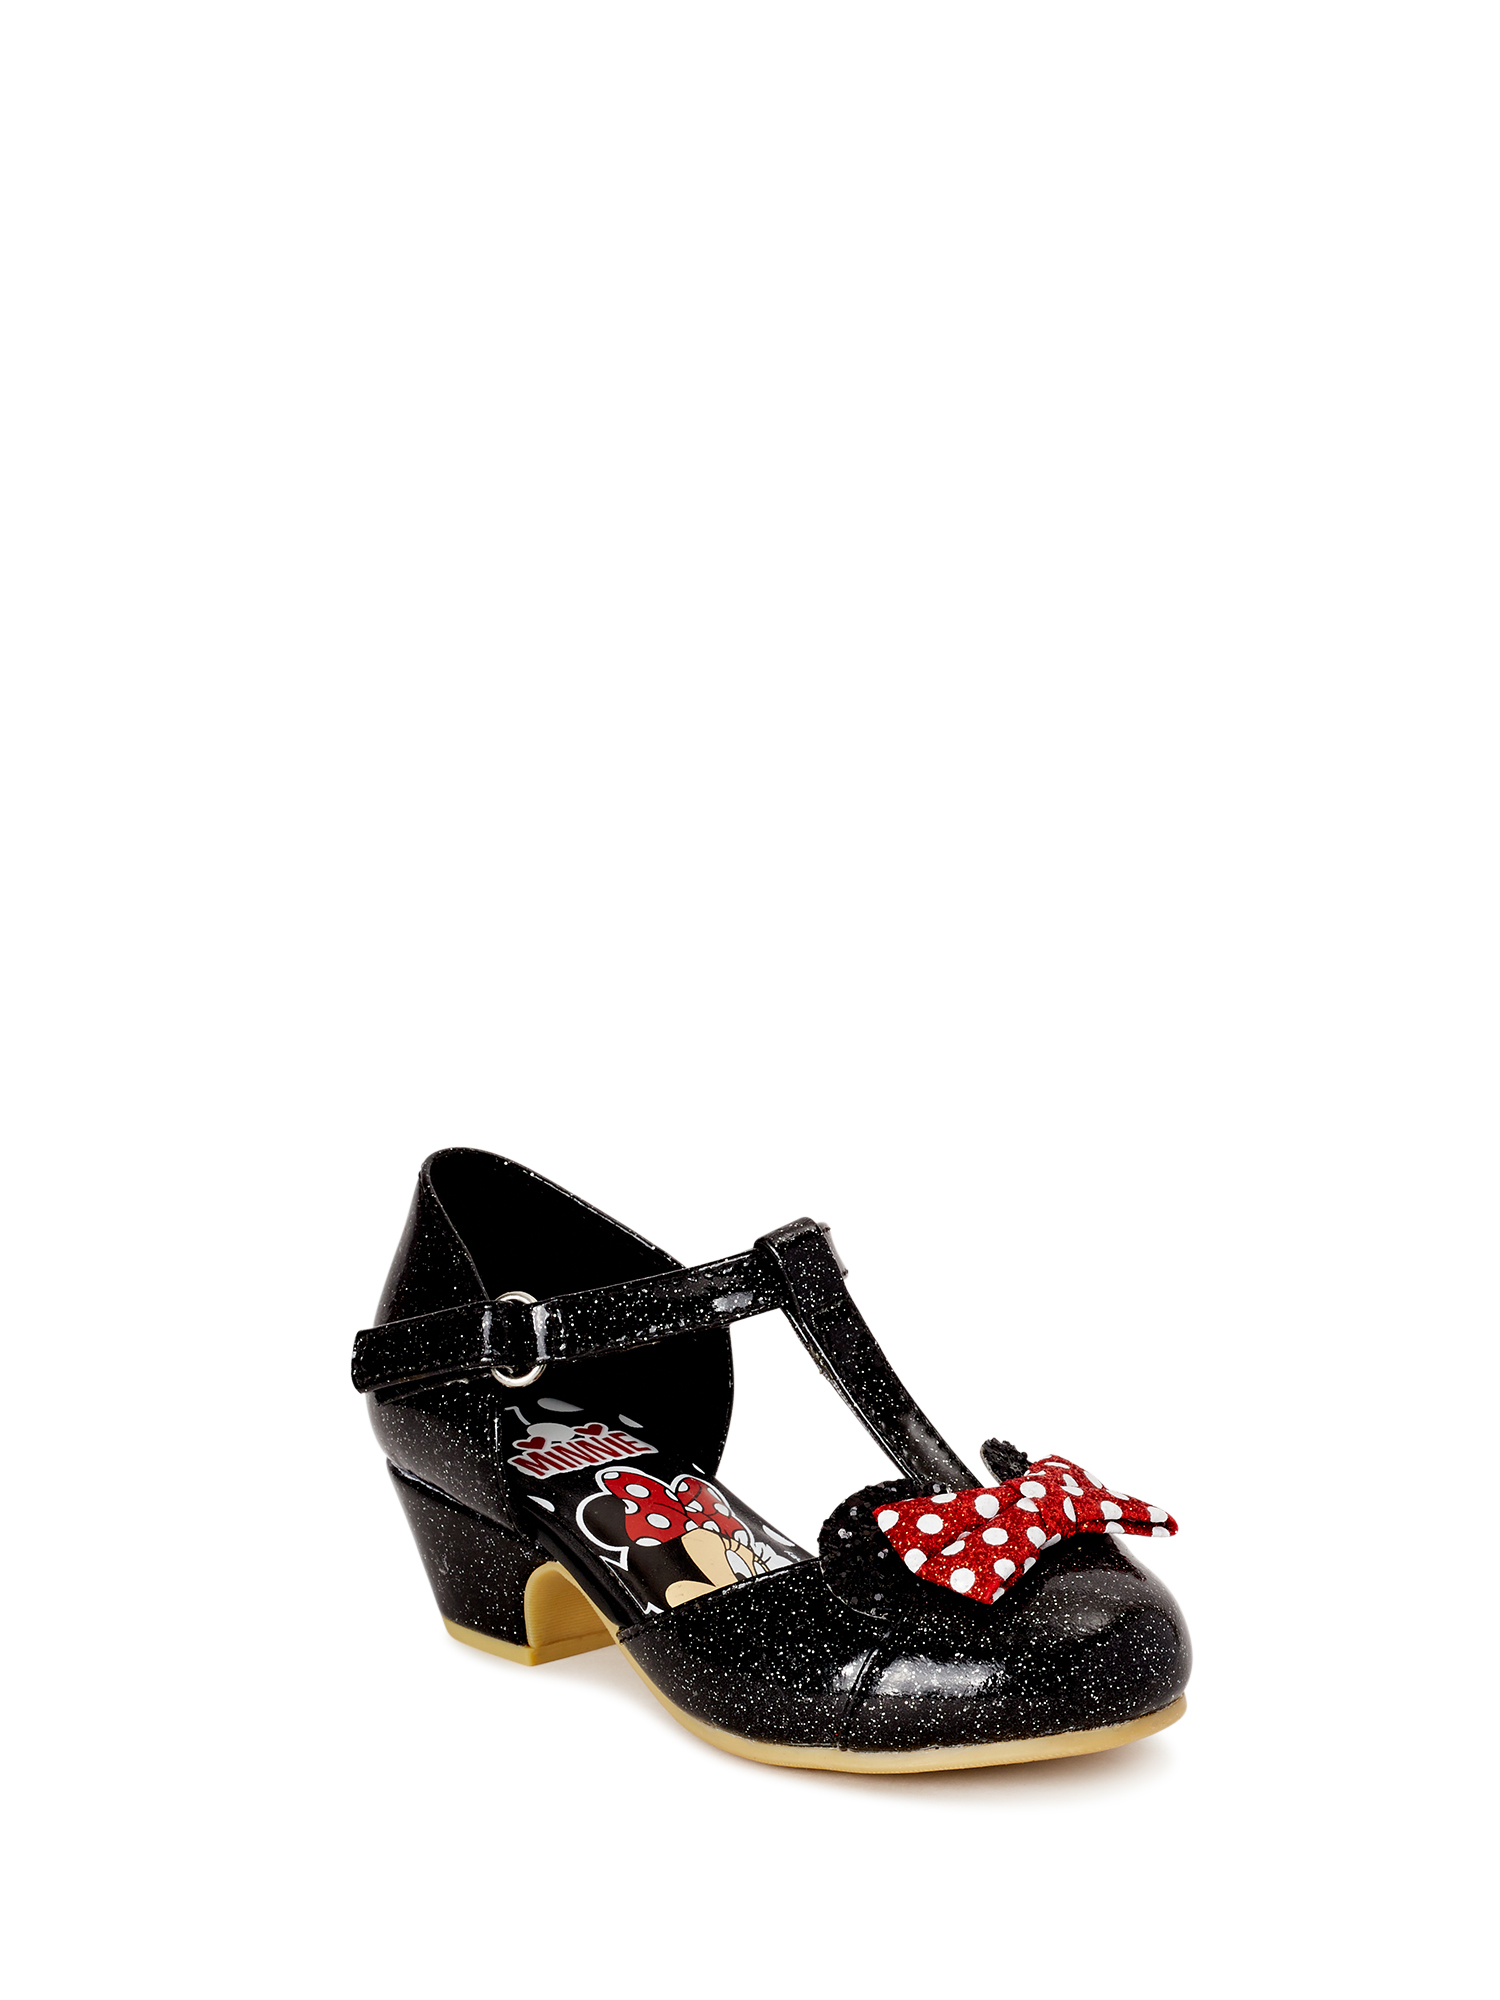 minnie mouse play shoes